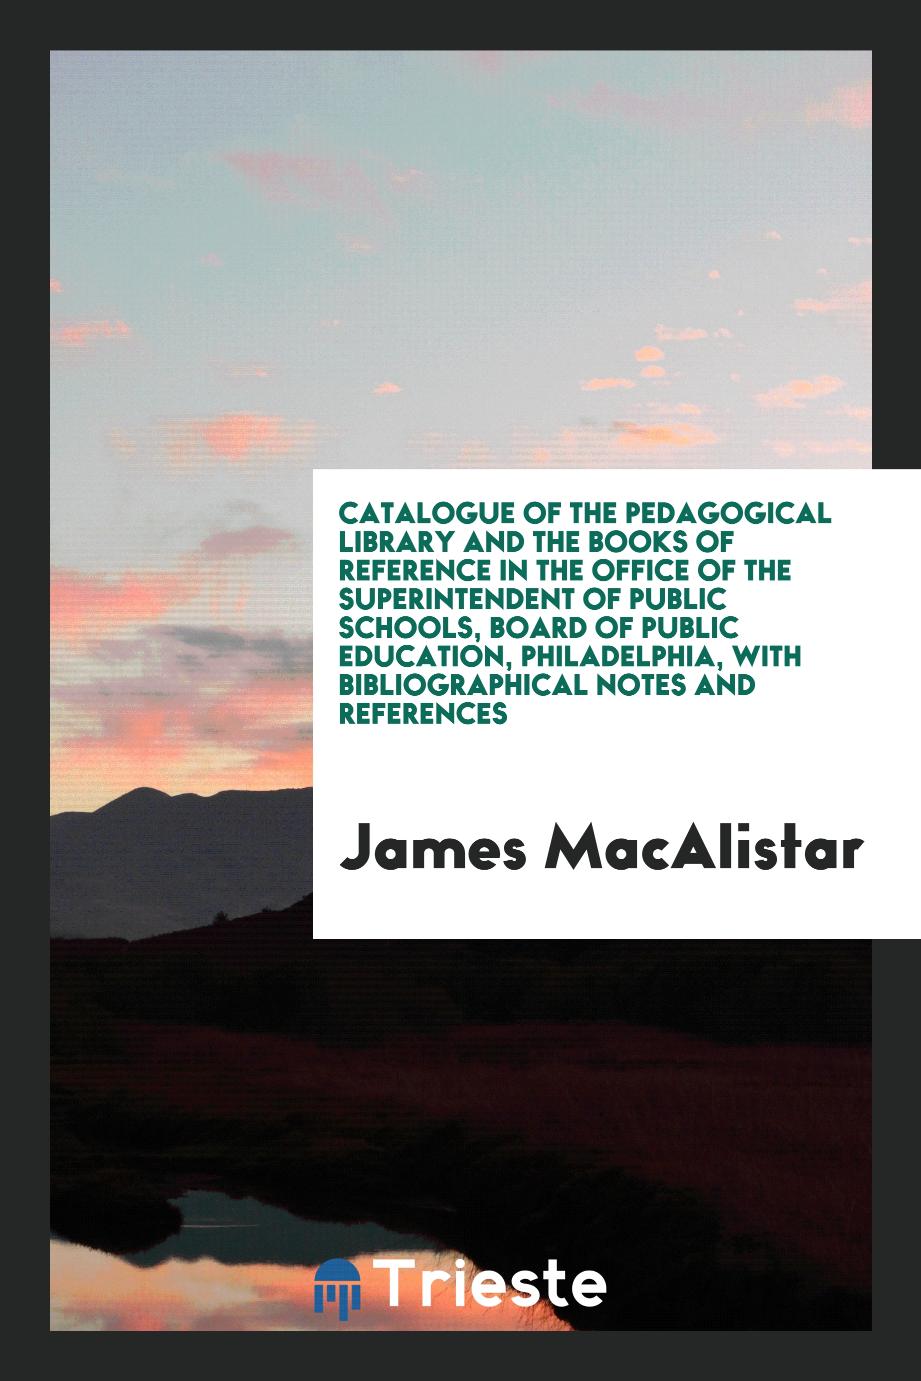 James MacAlistar - Catalogue of the Pedagogical Library and the Books of Reference in the Office of the Superintendent of Public Schools, Board of Public Education, Philadelphia, with Bibliographical Notes and References